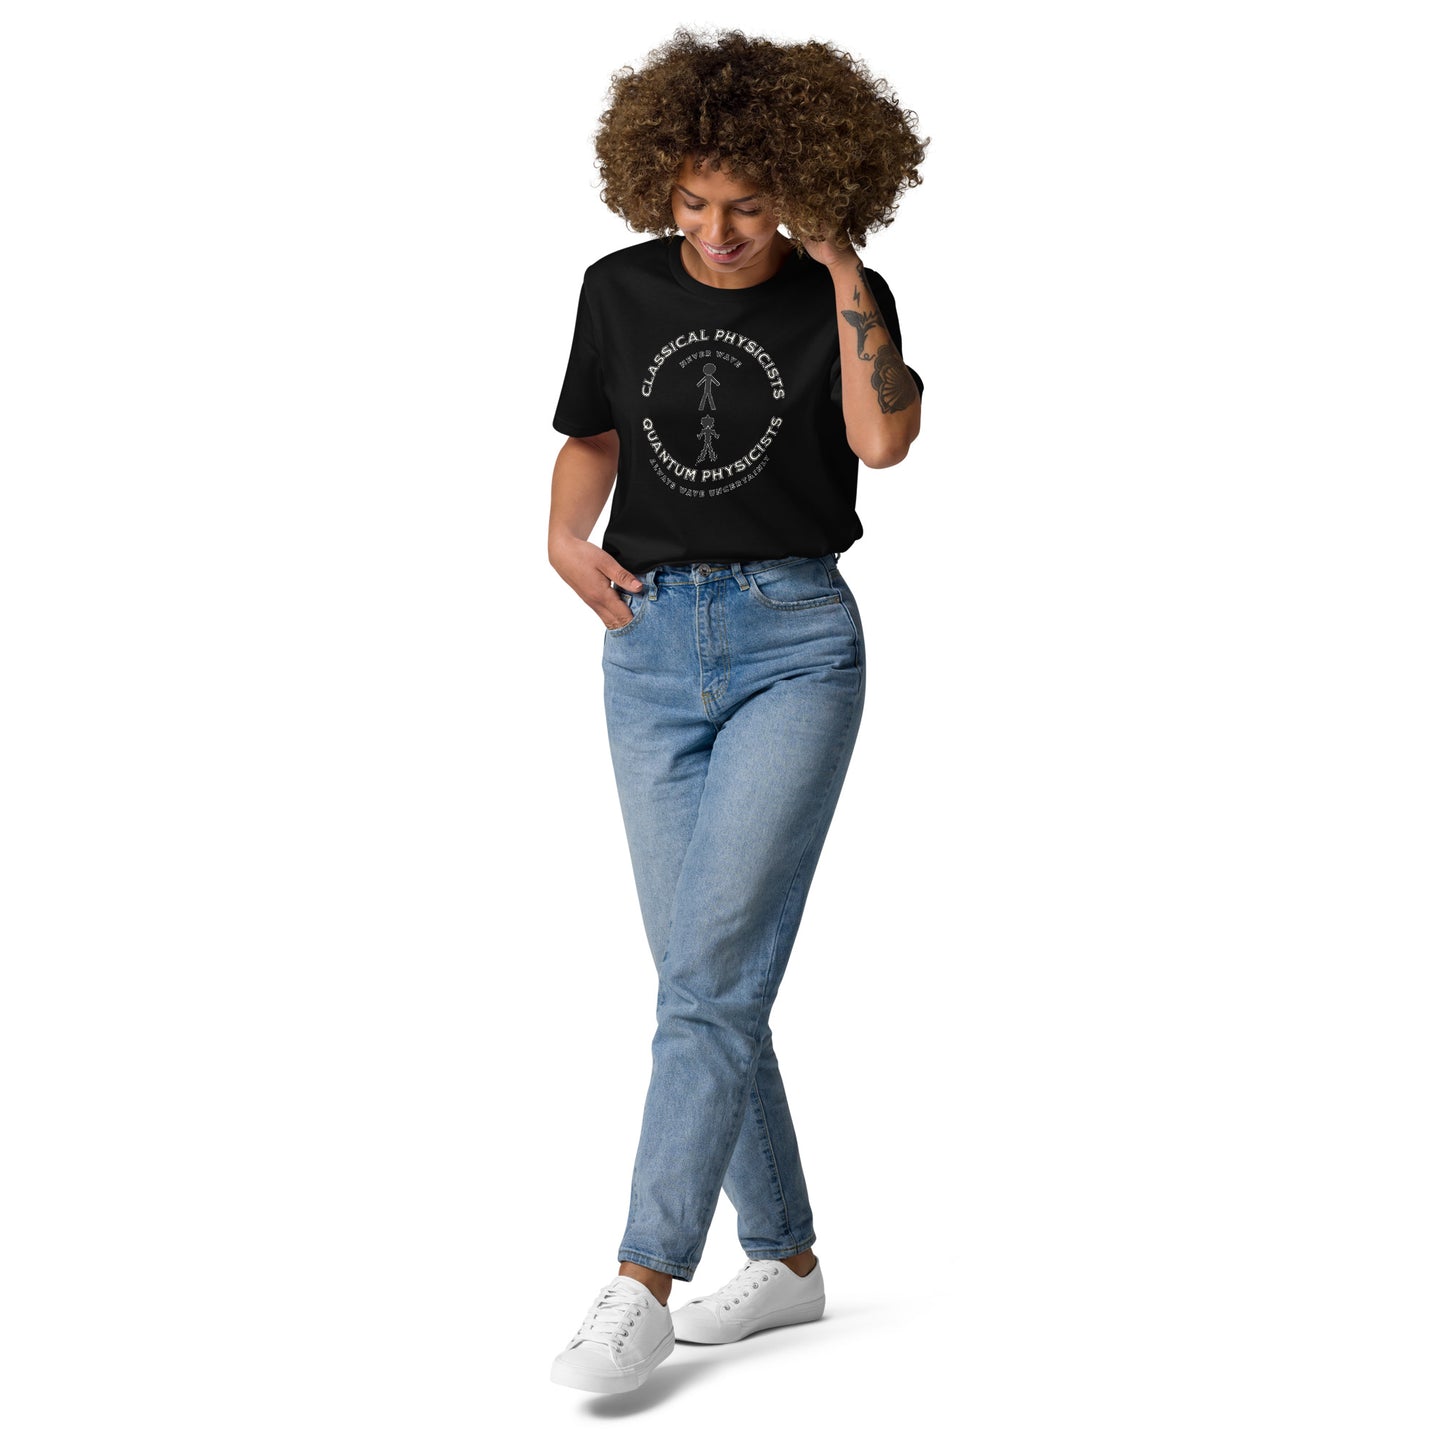 Unisex organic cotton t-shirt, Classical Physicists Never Wave...